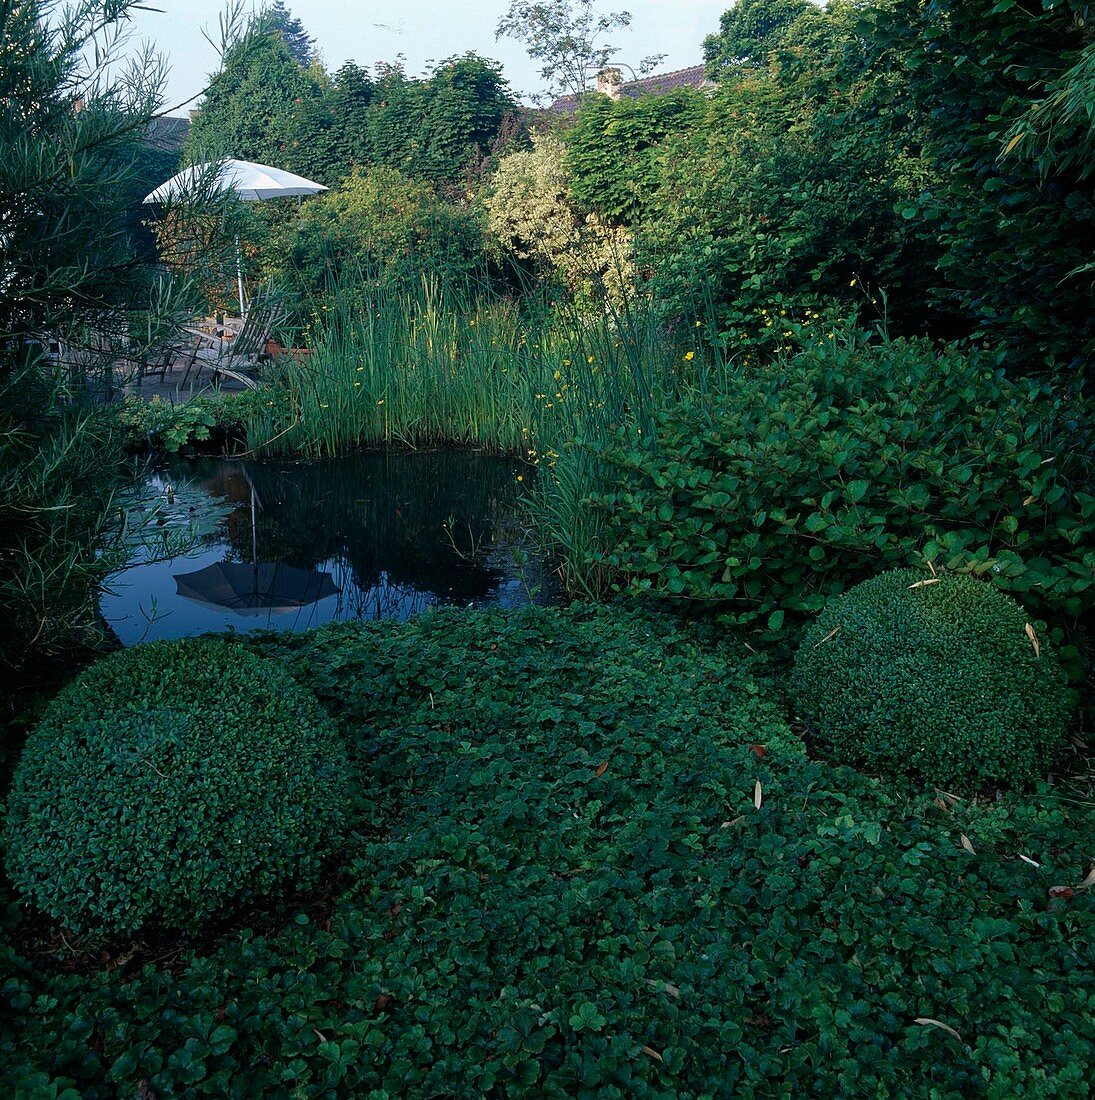 Waldsteinia ternata (golden strawberry) as ground cover, Buxus (box) balls, Scirpus lacustris (rushes)and Ranunculus flammula (buttercup) in the pond, in the back terrace with parasol